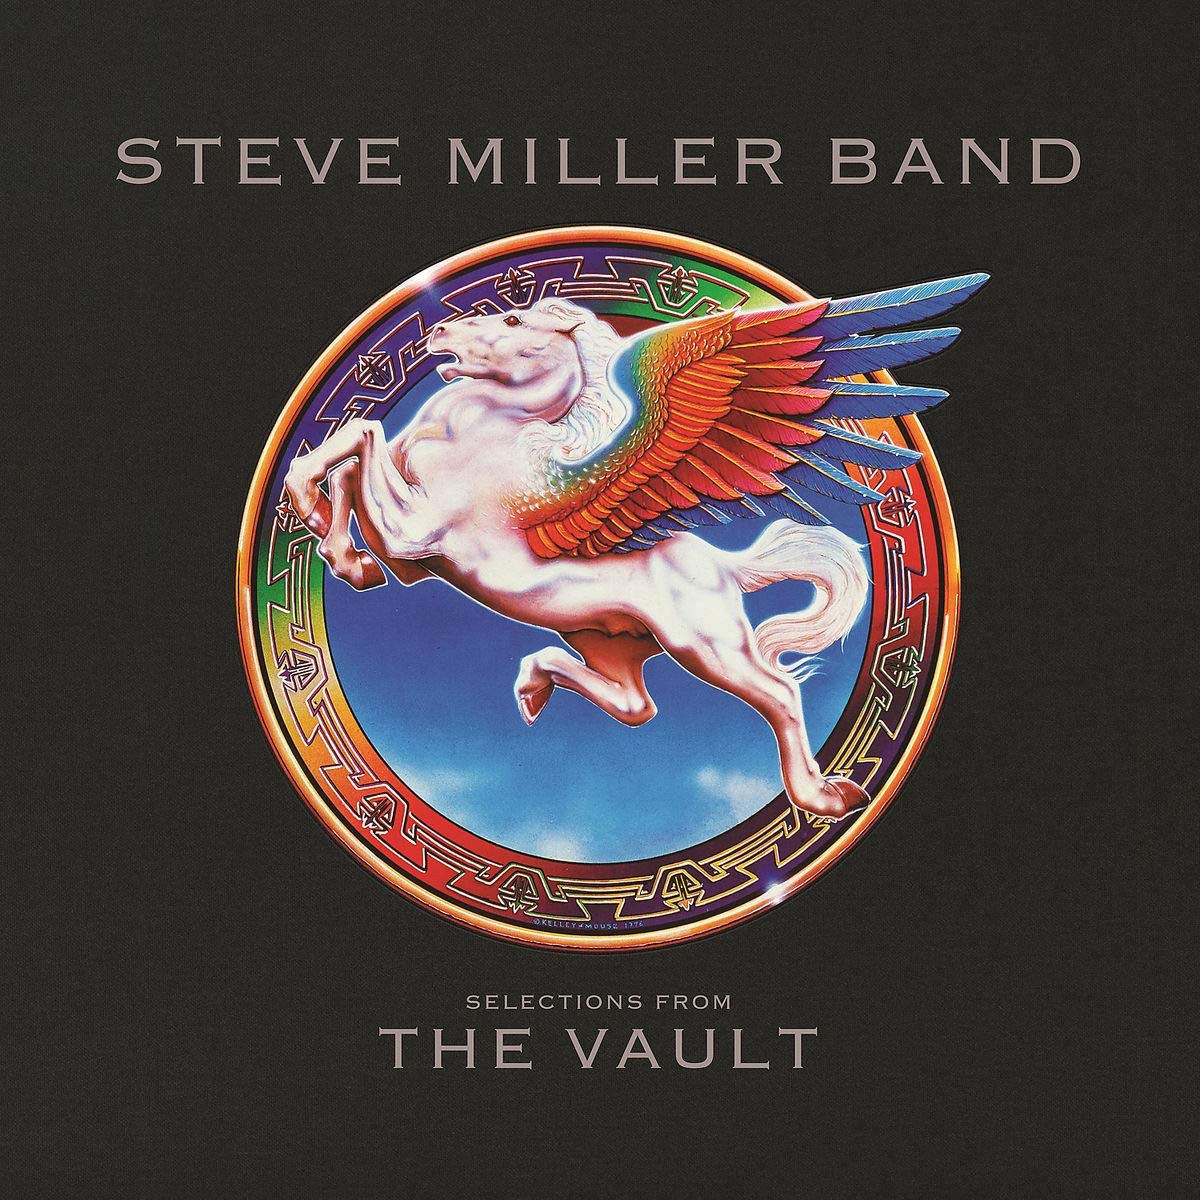 CD Shop - STEVE MILLER BAND SELECTIONS FROM THE VAULT